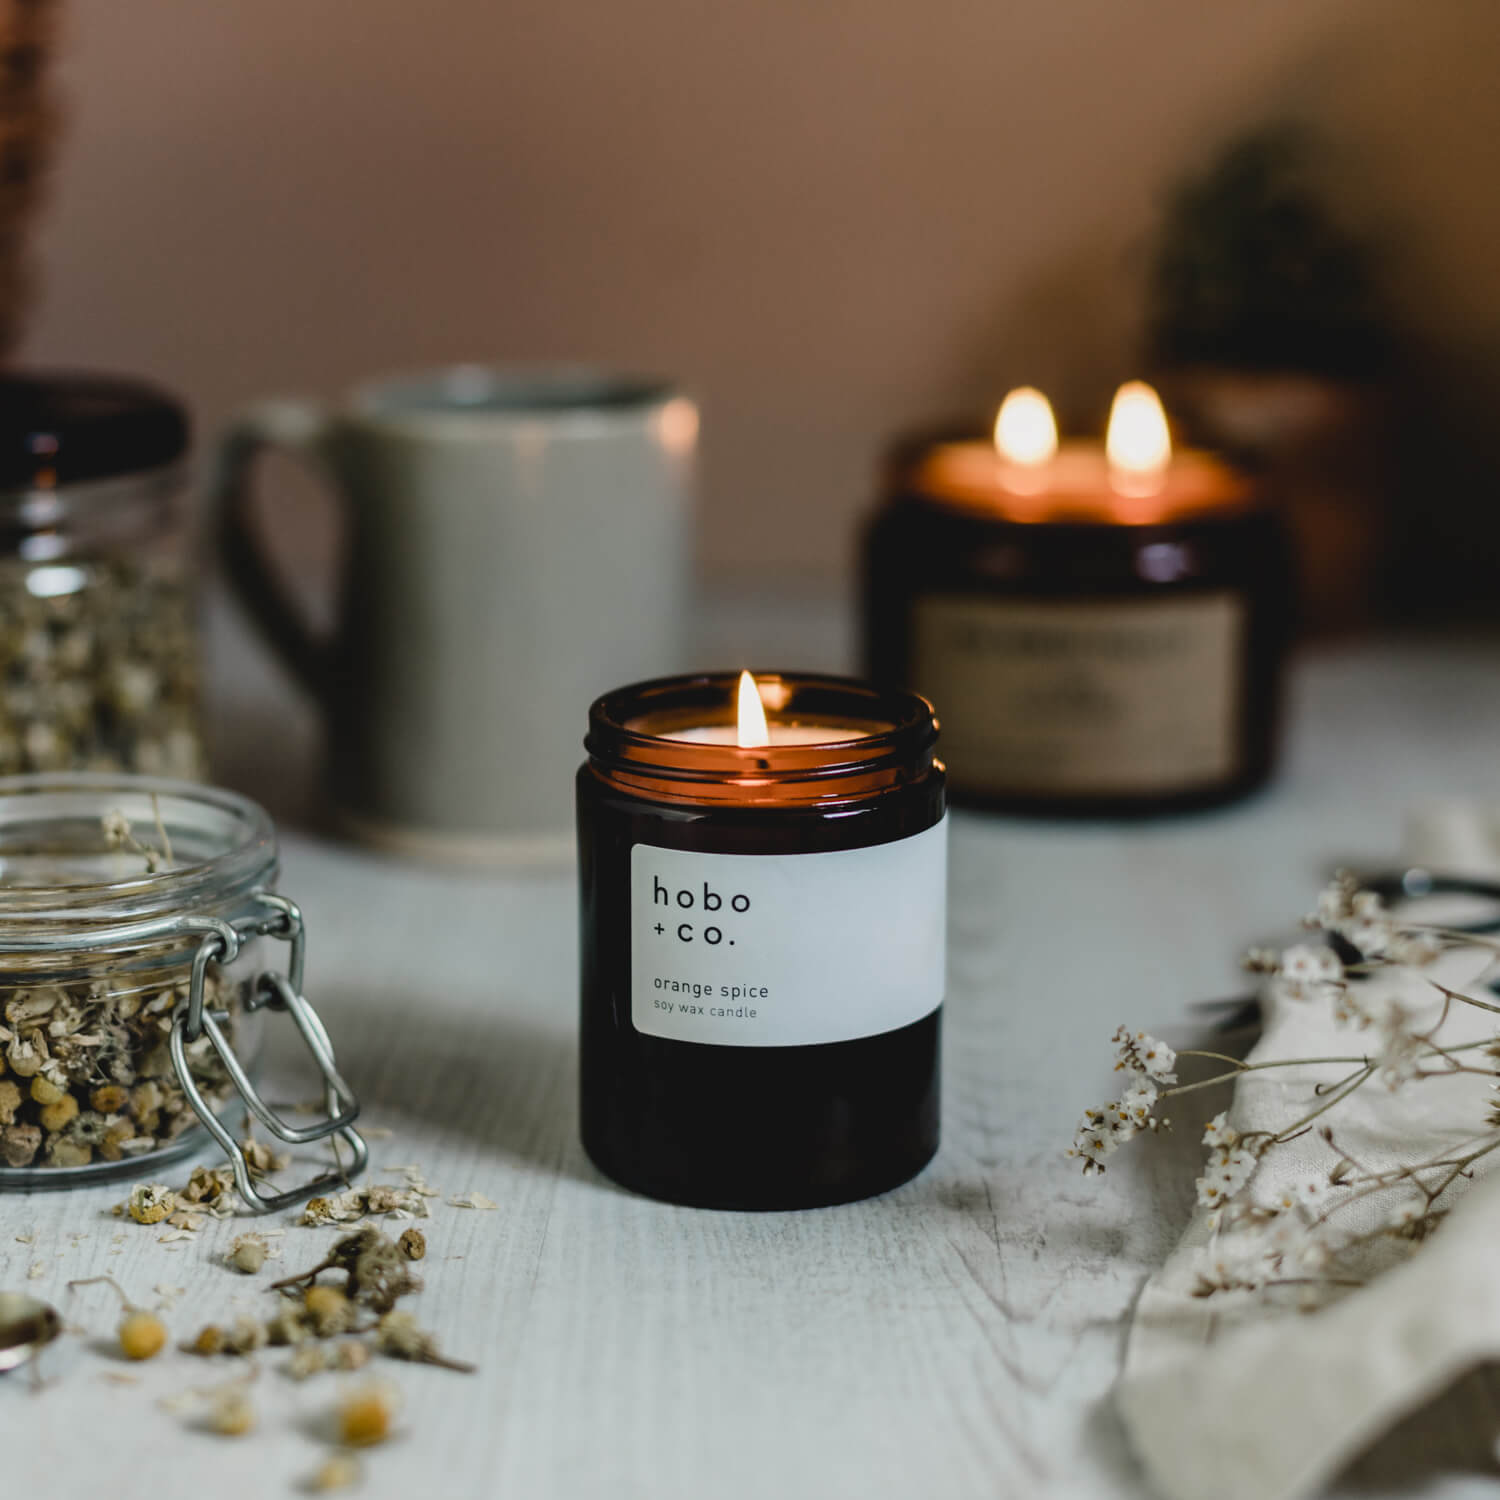 Hobo + Co. Orange Spice Scented Candle - Osmology Scented Candles & Home Fragrance